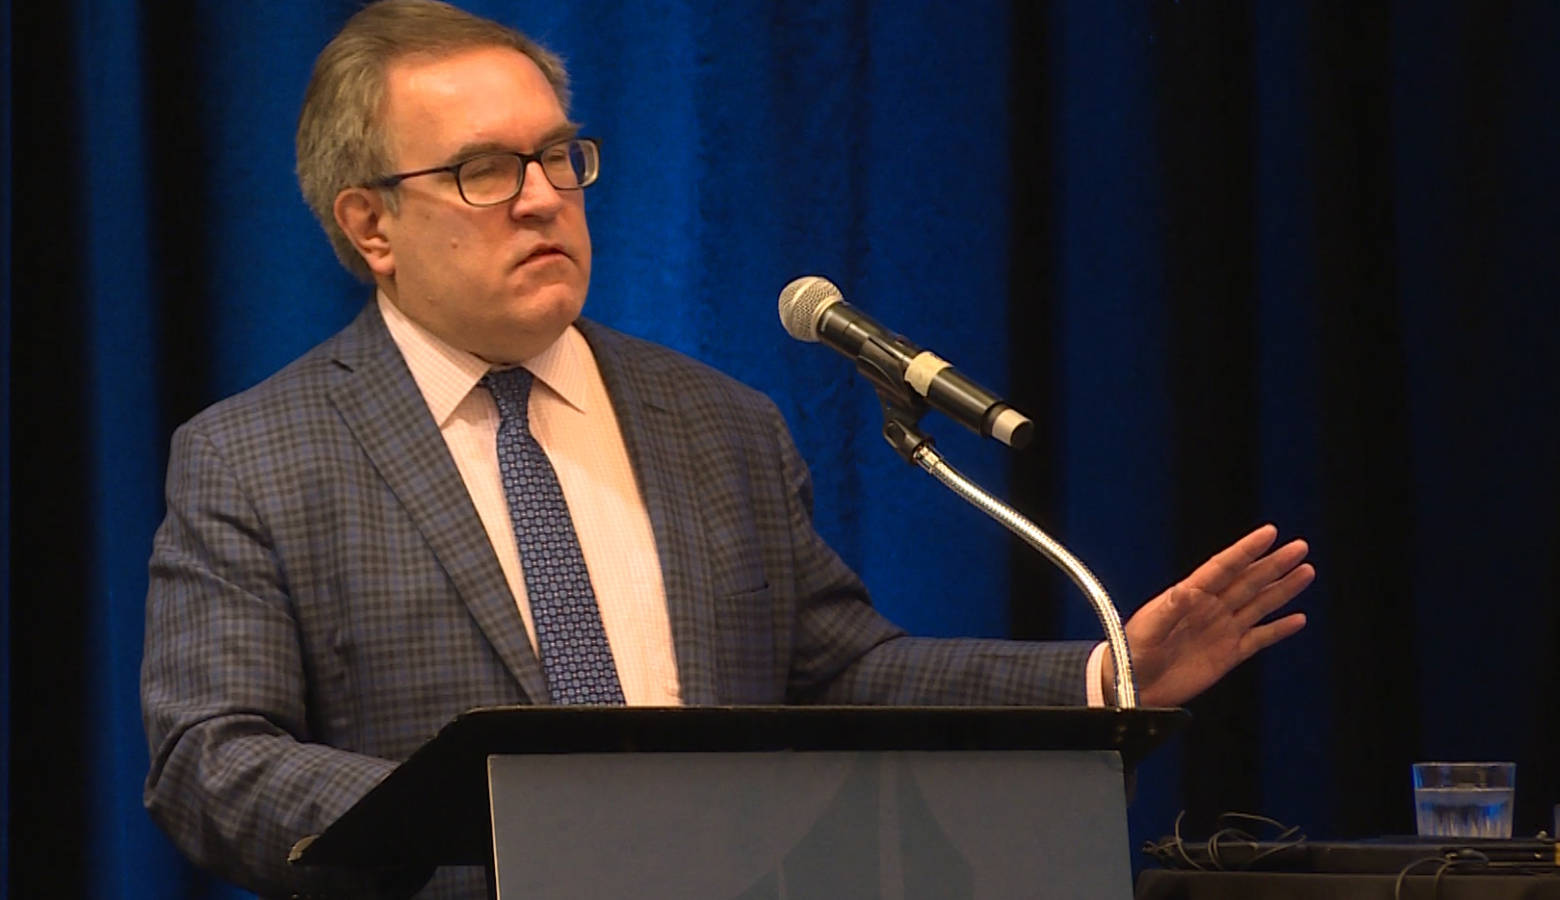 EPA Administrator Andrew Wheeler talked about federal regulation at an annual environmental conference put on by the Indiana Chamber of Commerce. (Jeanie Lindsay/IPB News)